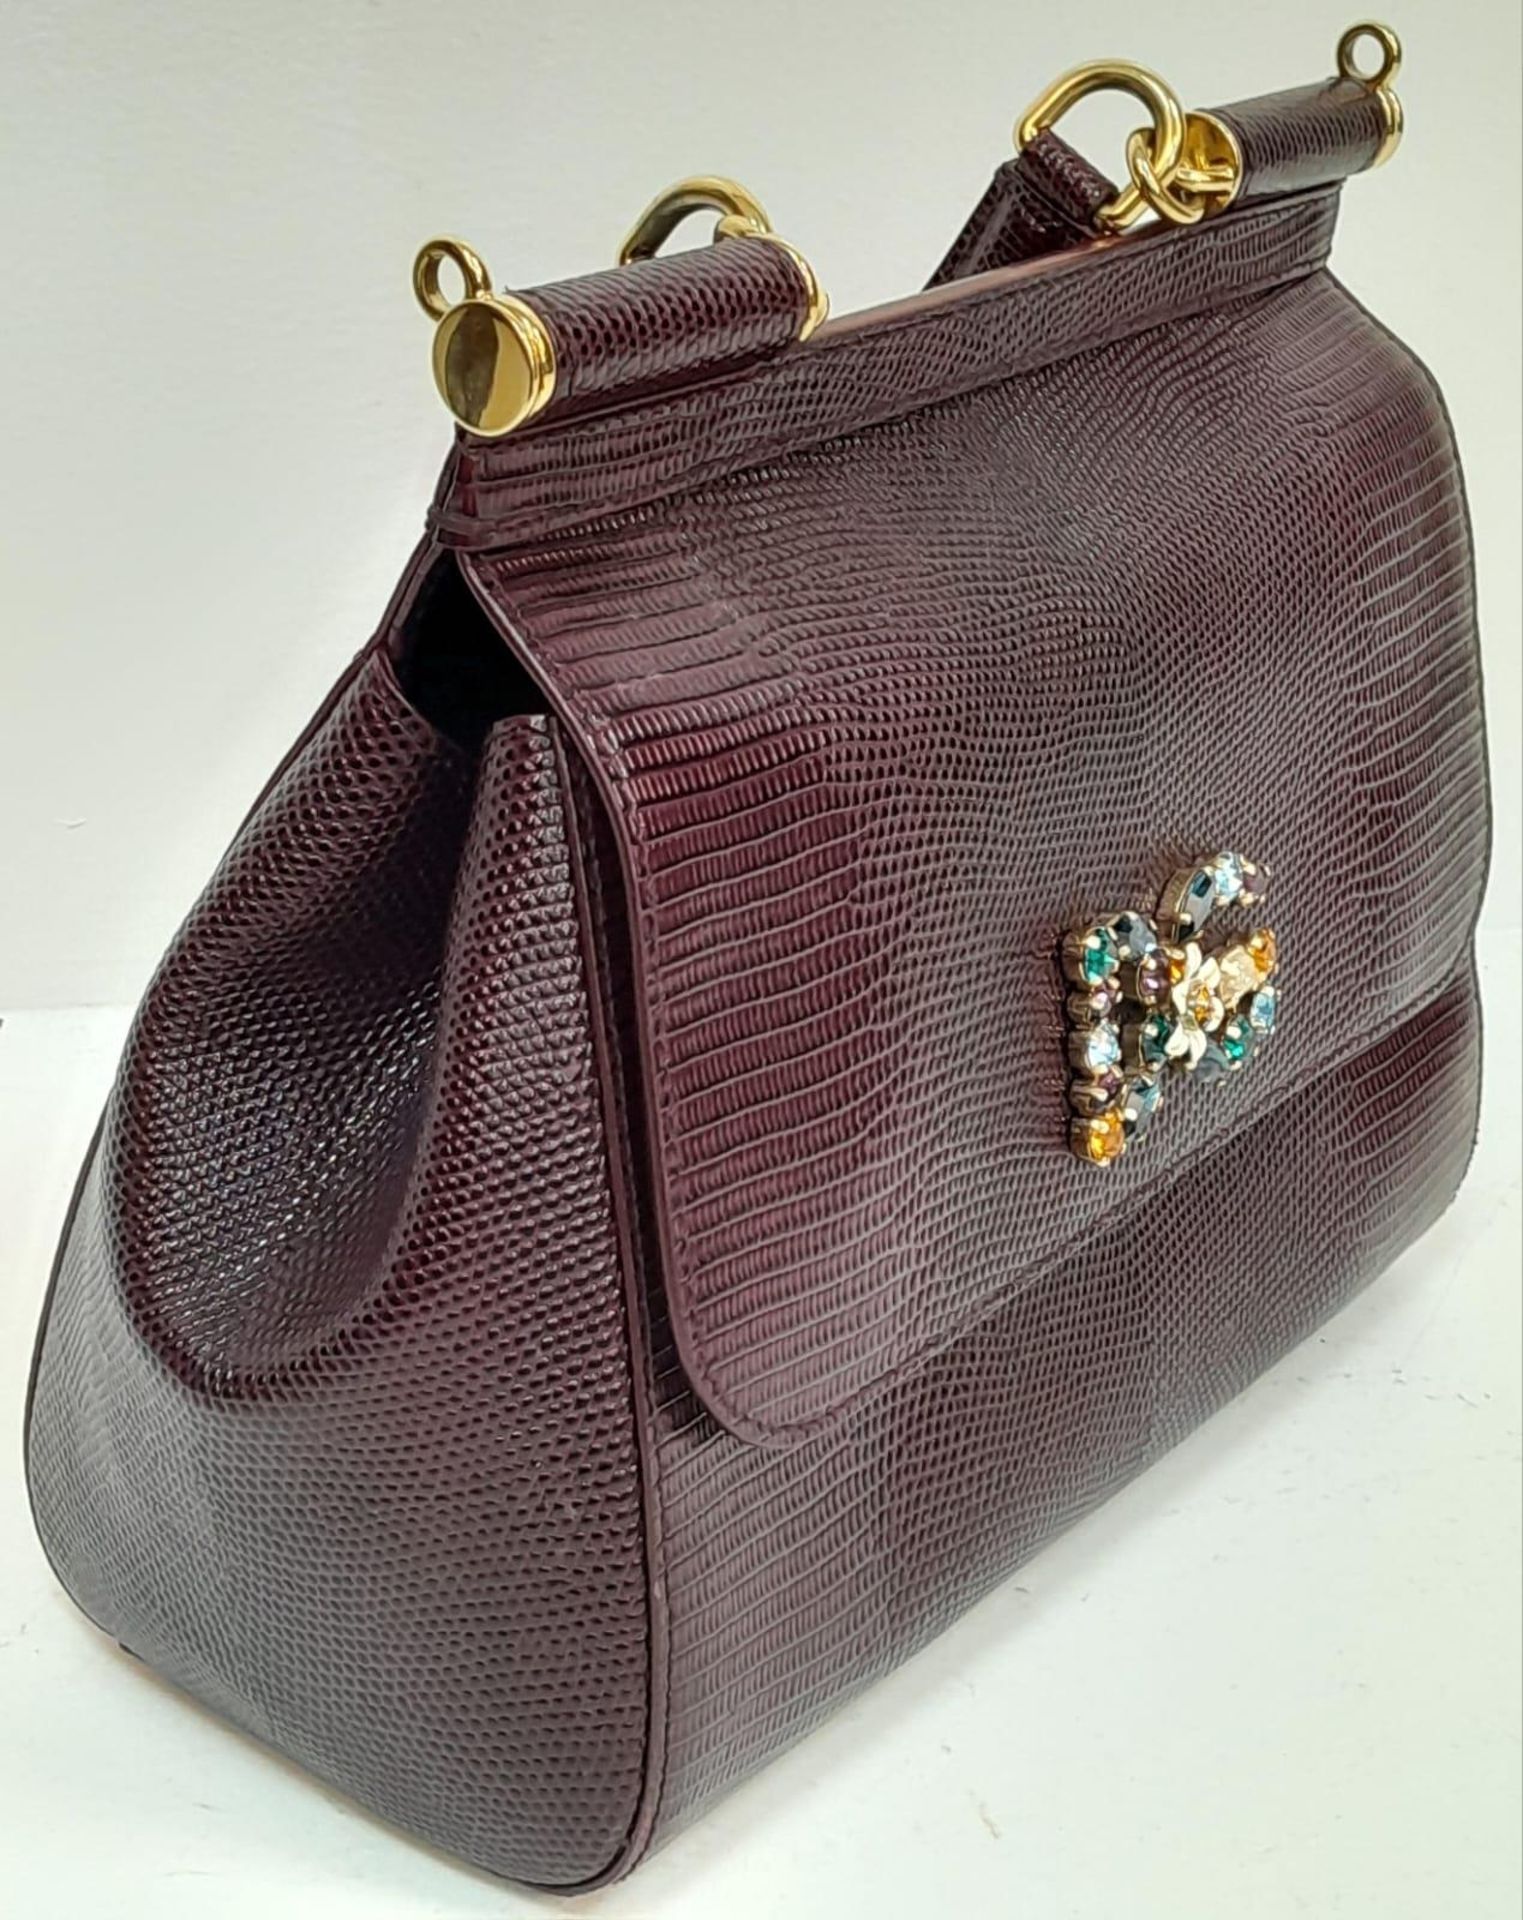 A Dolce & Gabbana Burgundy Miss Sicily Bag. Reptile embossed leather exterior with gold-toned - Image 4 of 6